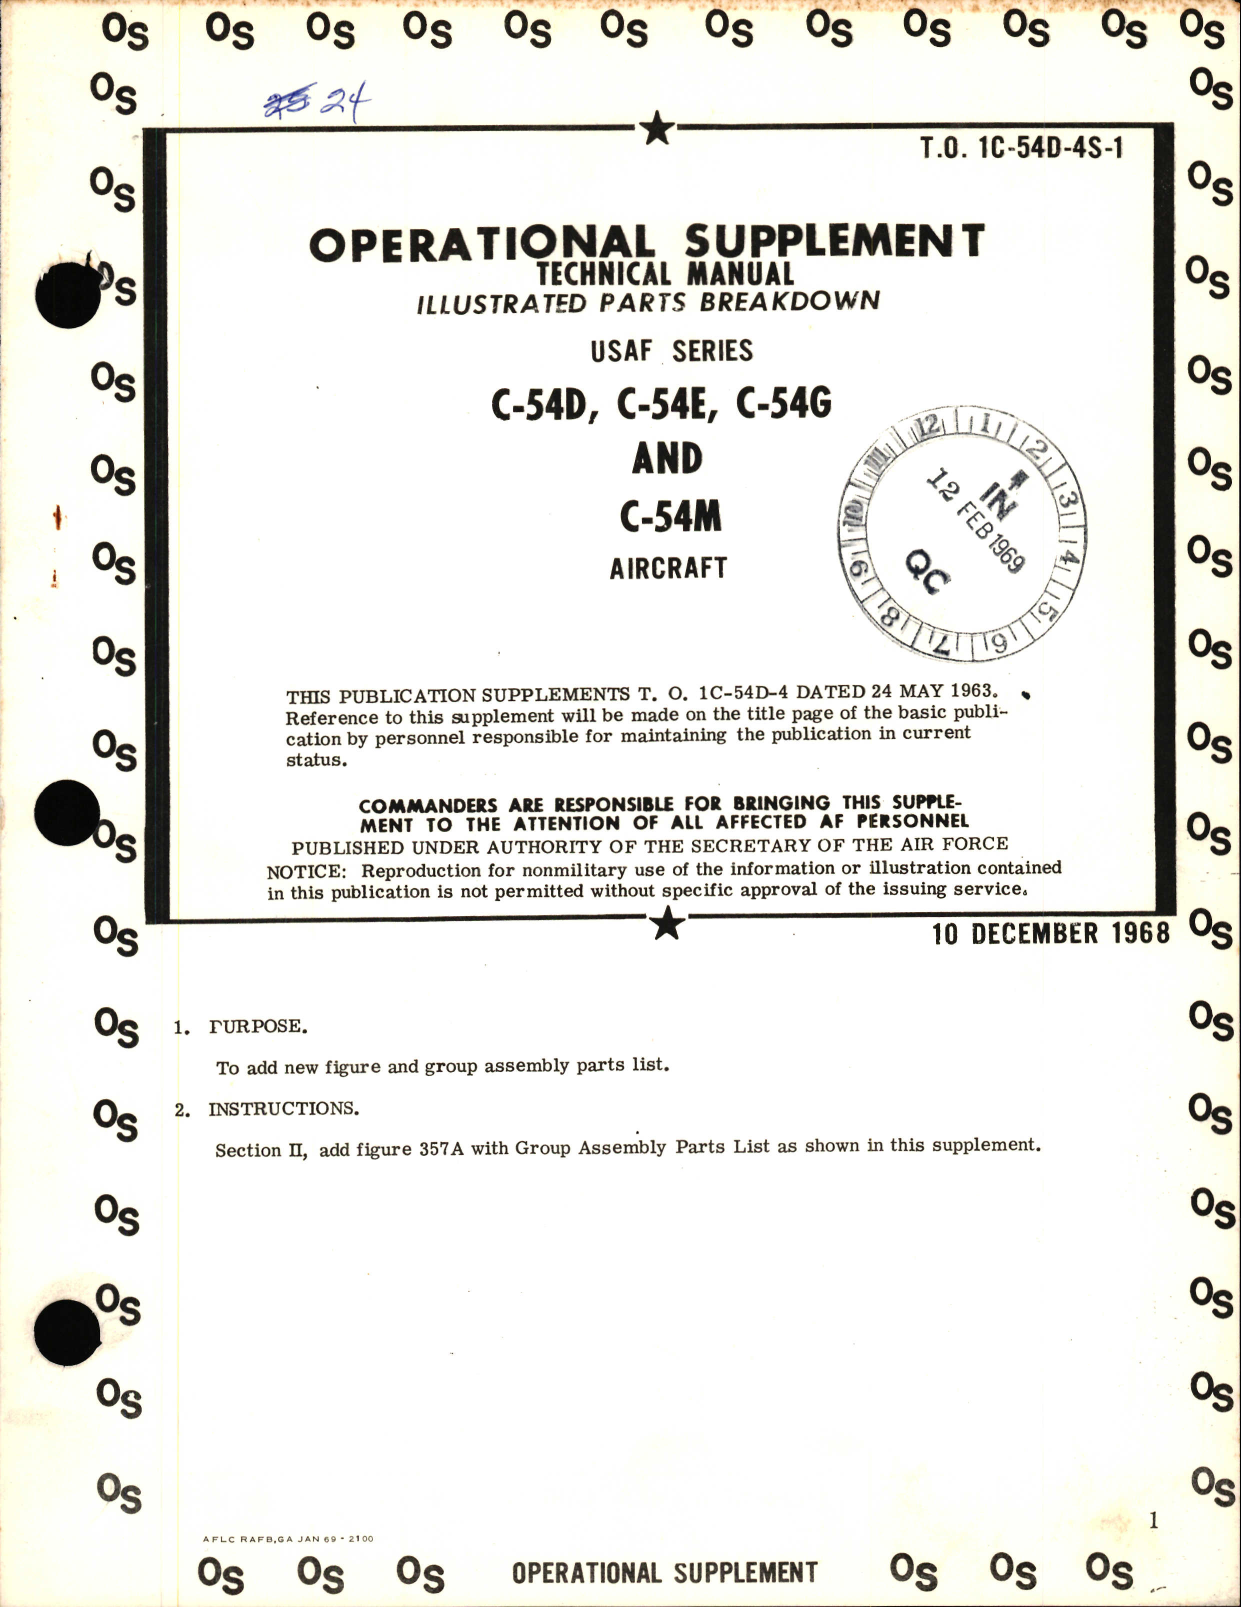 Sample page 1 from AirCorps Library document: Operational Supplement, Illustrated Parts Breakdown for C-54D, C-54E, C-54G, and C-54M